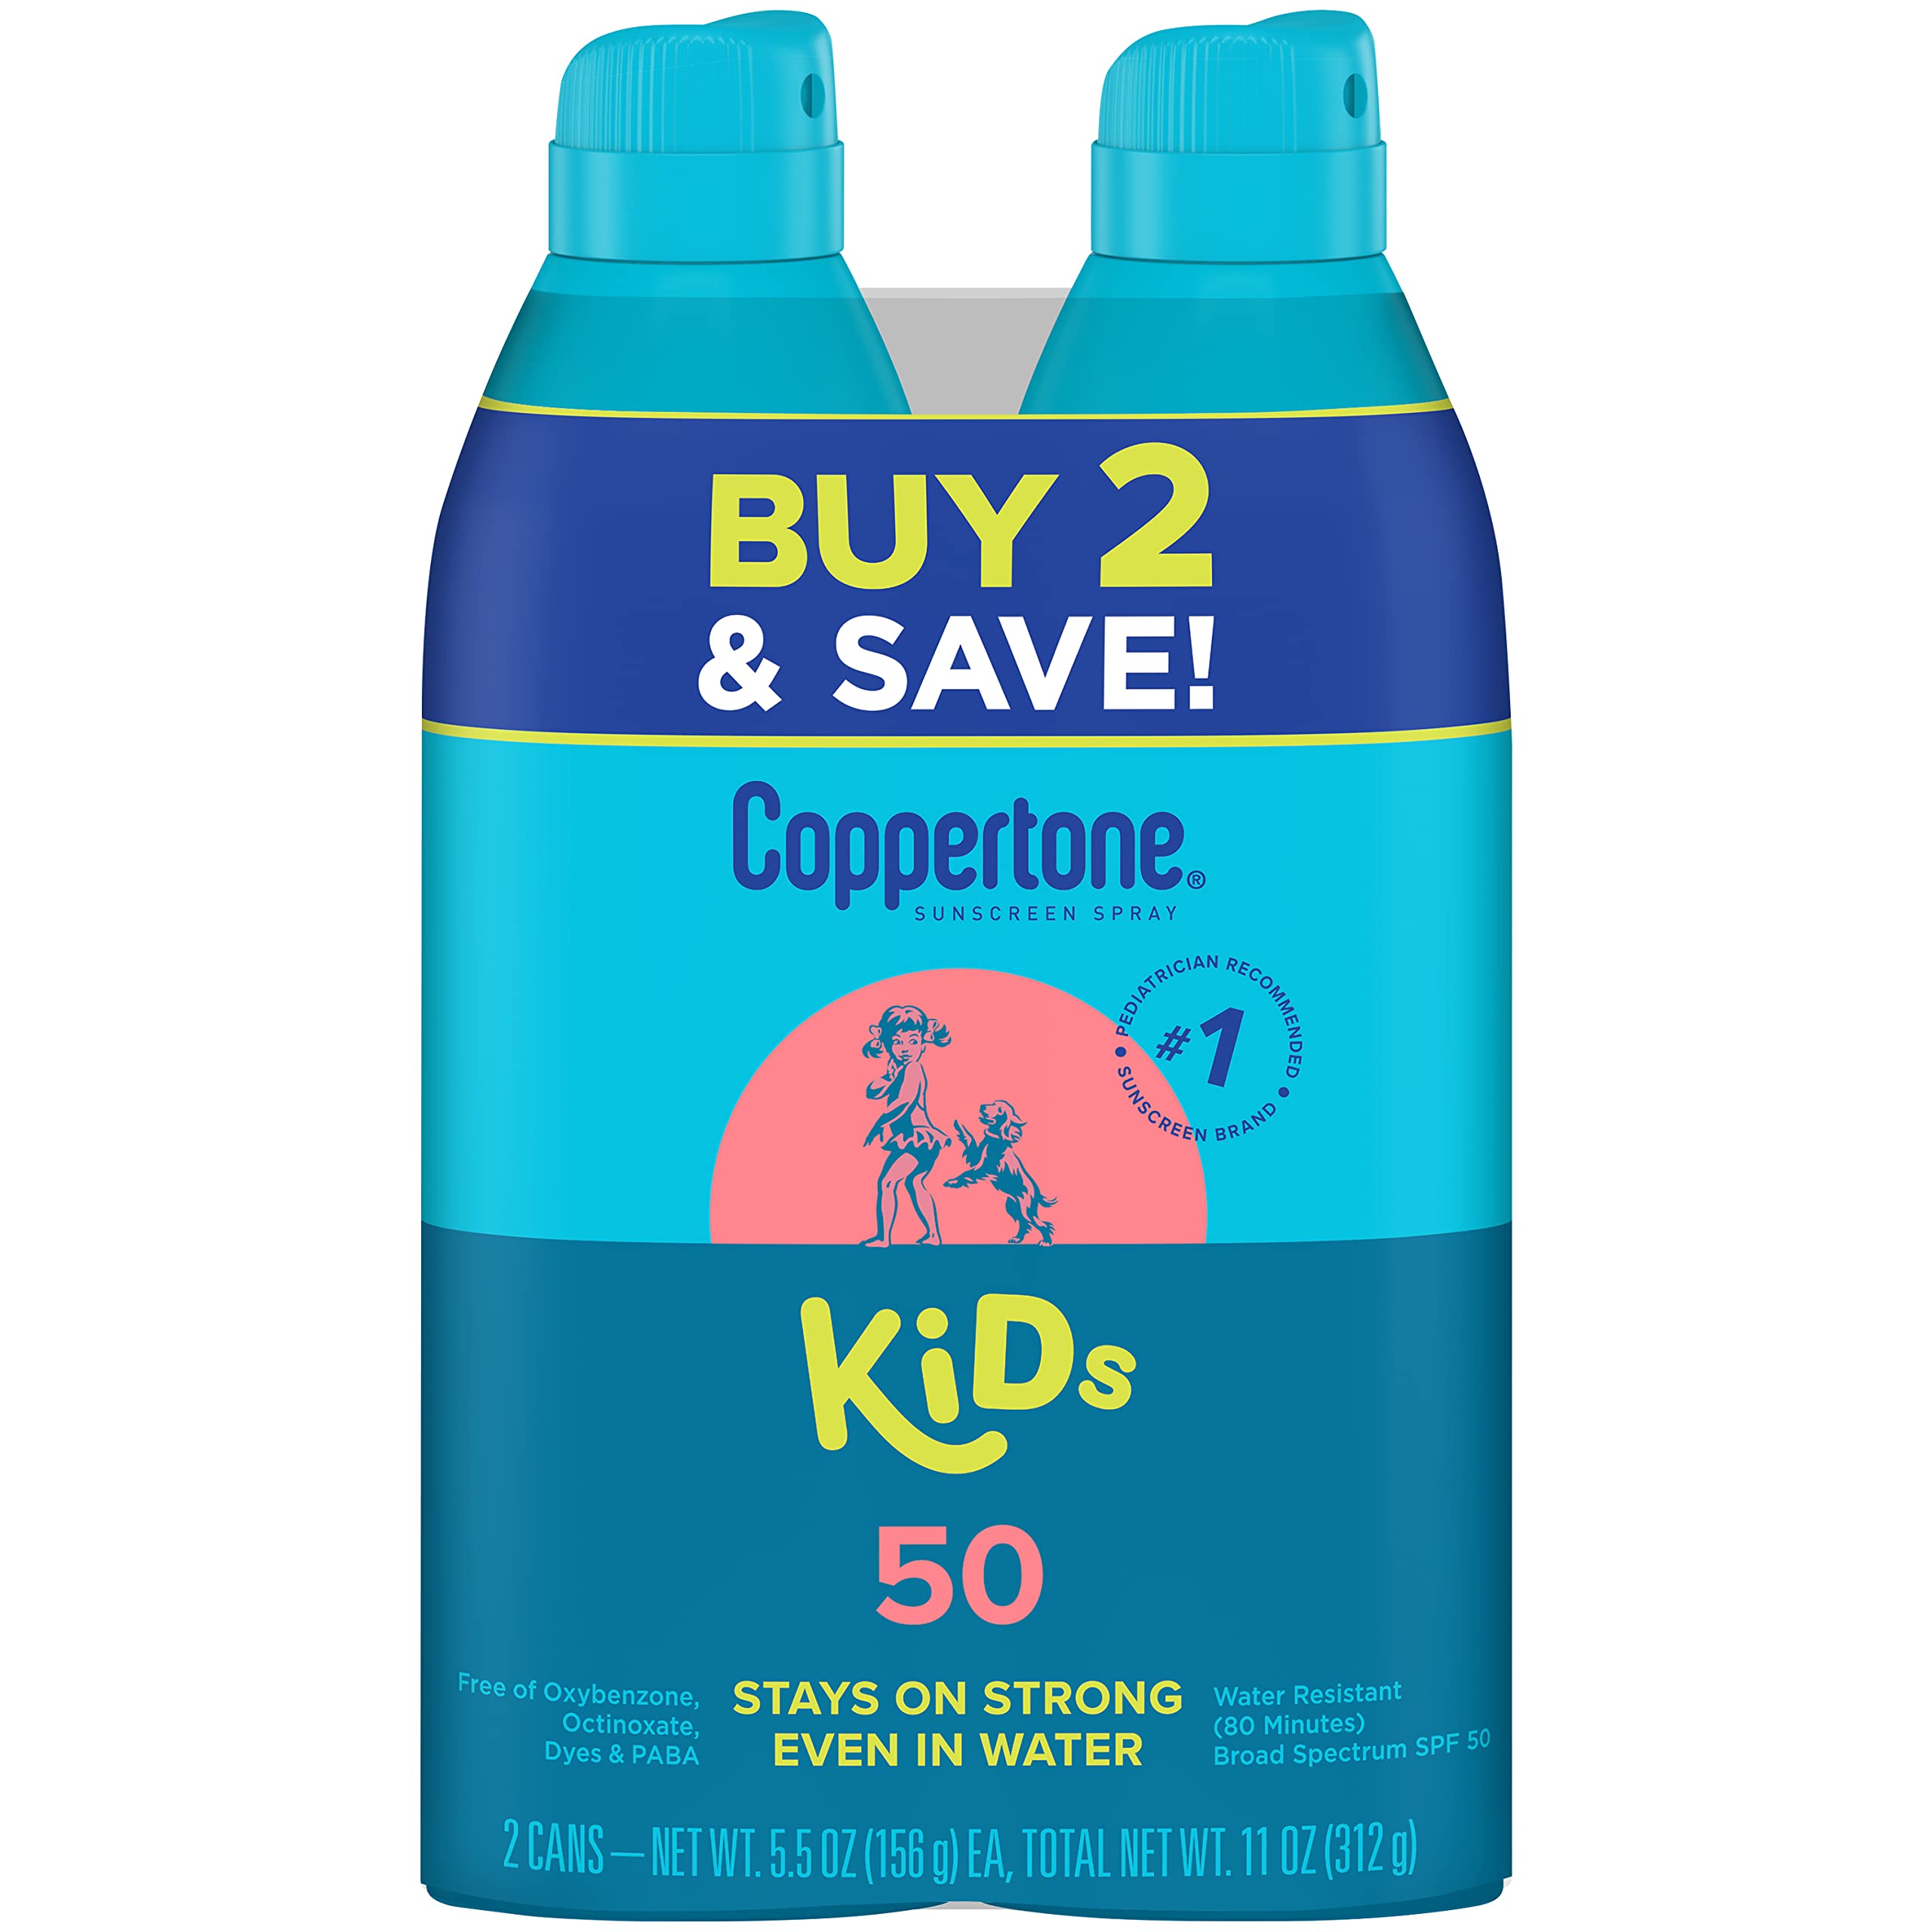 2-Count 5.5-Oz Coppertone Kids' SPF 50 Water Resistant Sunscreen Spray $6.18 ($3.09 each) w/ S&S + Free Shipping w/ Prime or on $35+